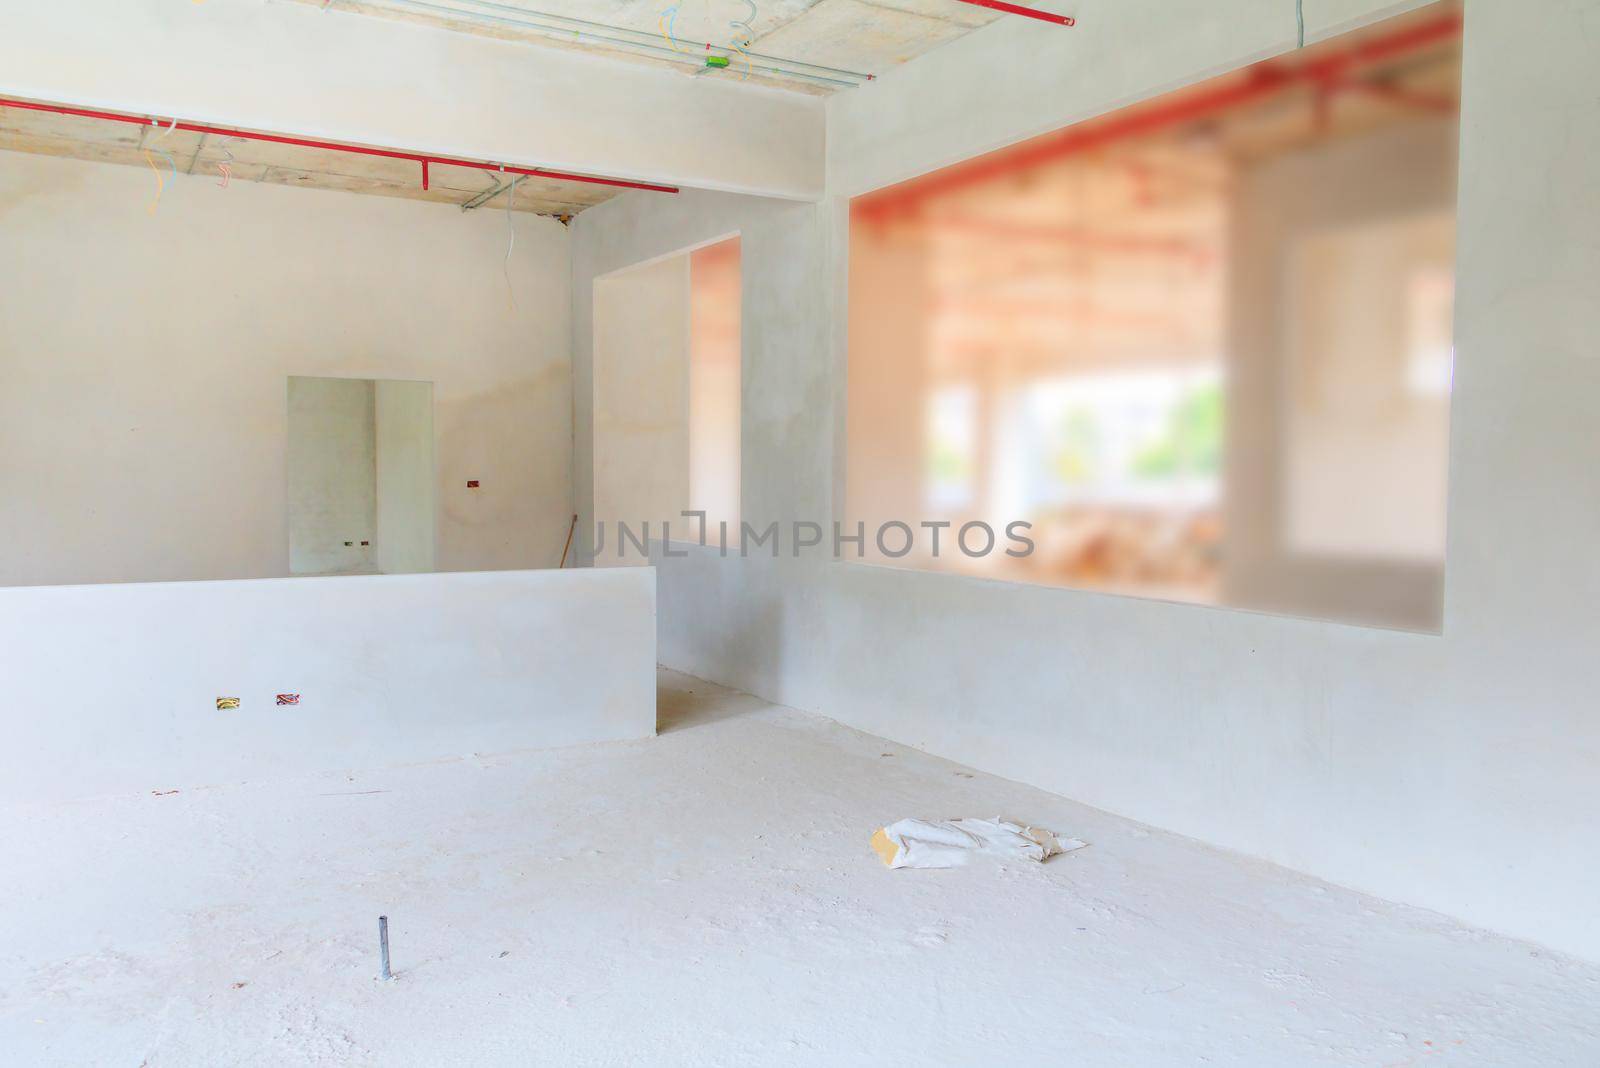 construction site  interior  building plan development on housing  with copy space add text by pramot